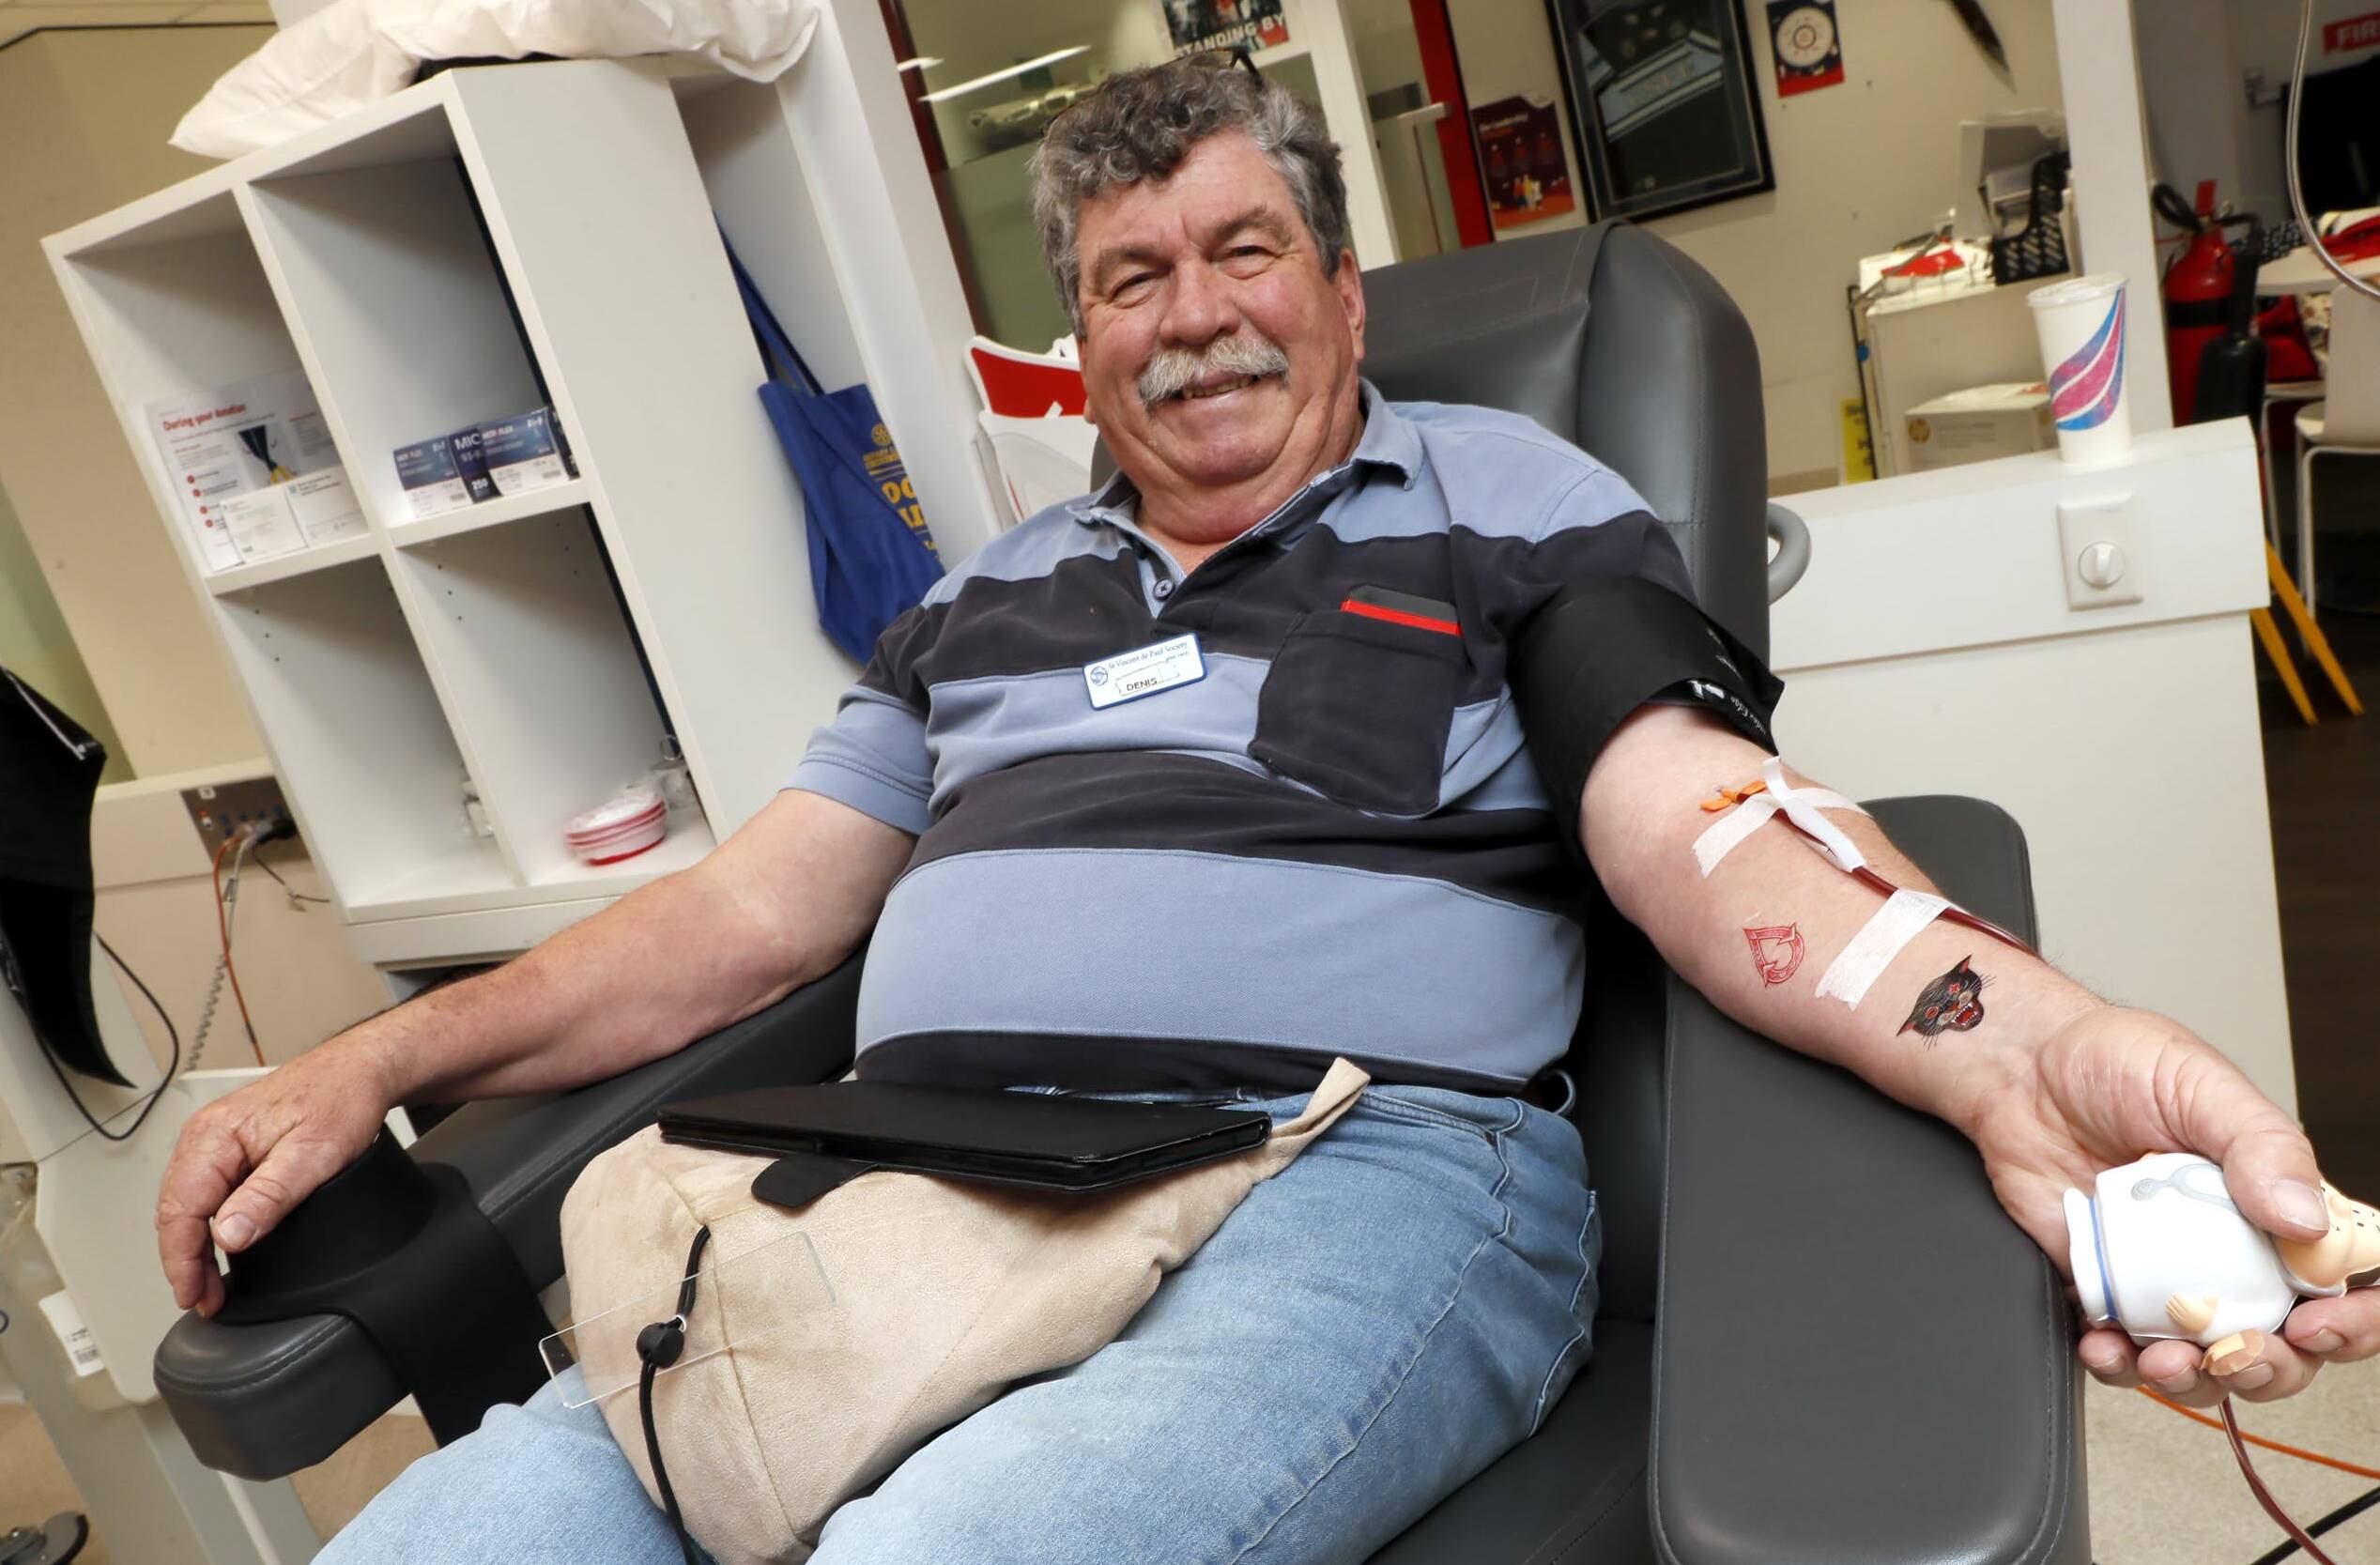 Tattooed Australians now eligible to give blood one week after new ink |  news.com.au — Australia's leading news site